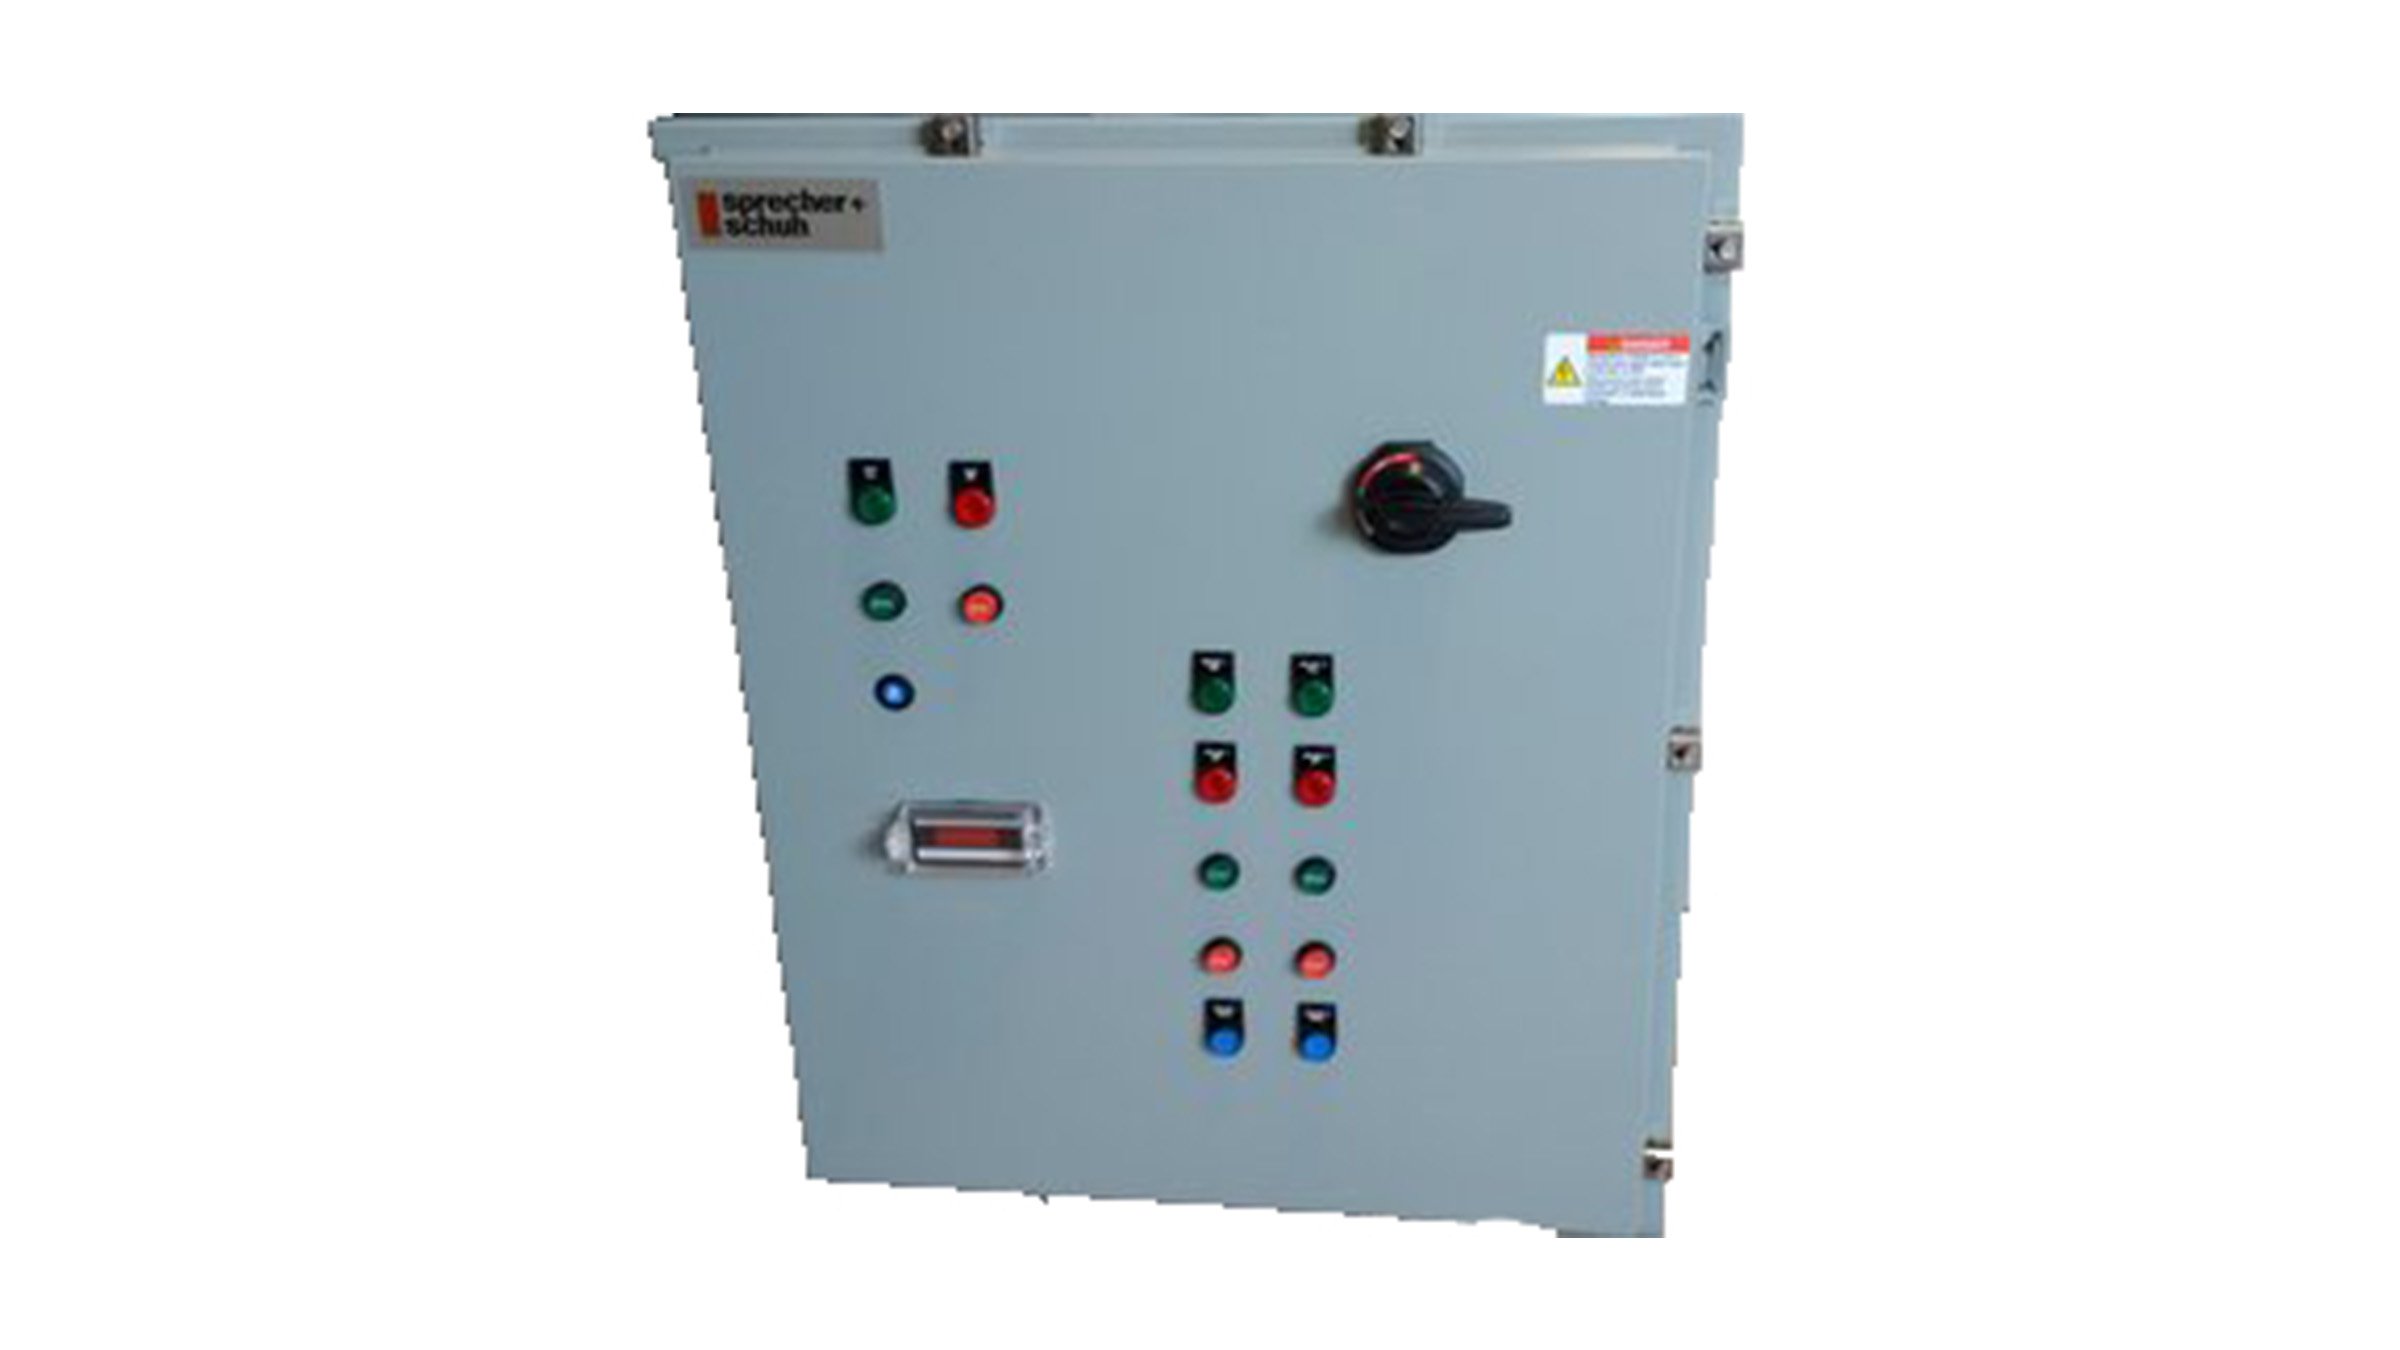 Sprecher & Schuh PCS Control Panel cover for JT Systems dust collection equipment